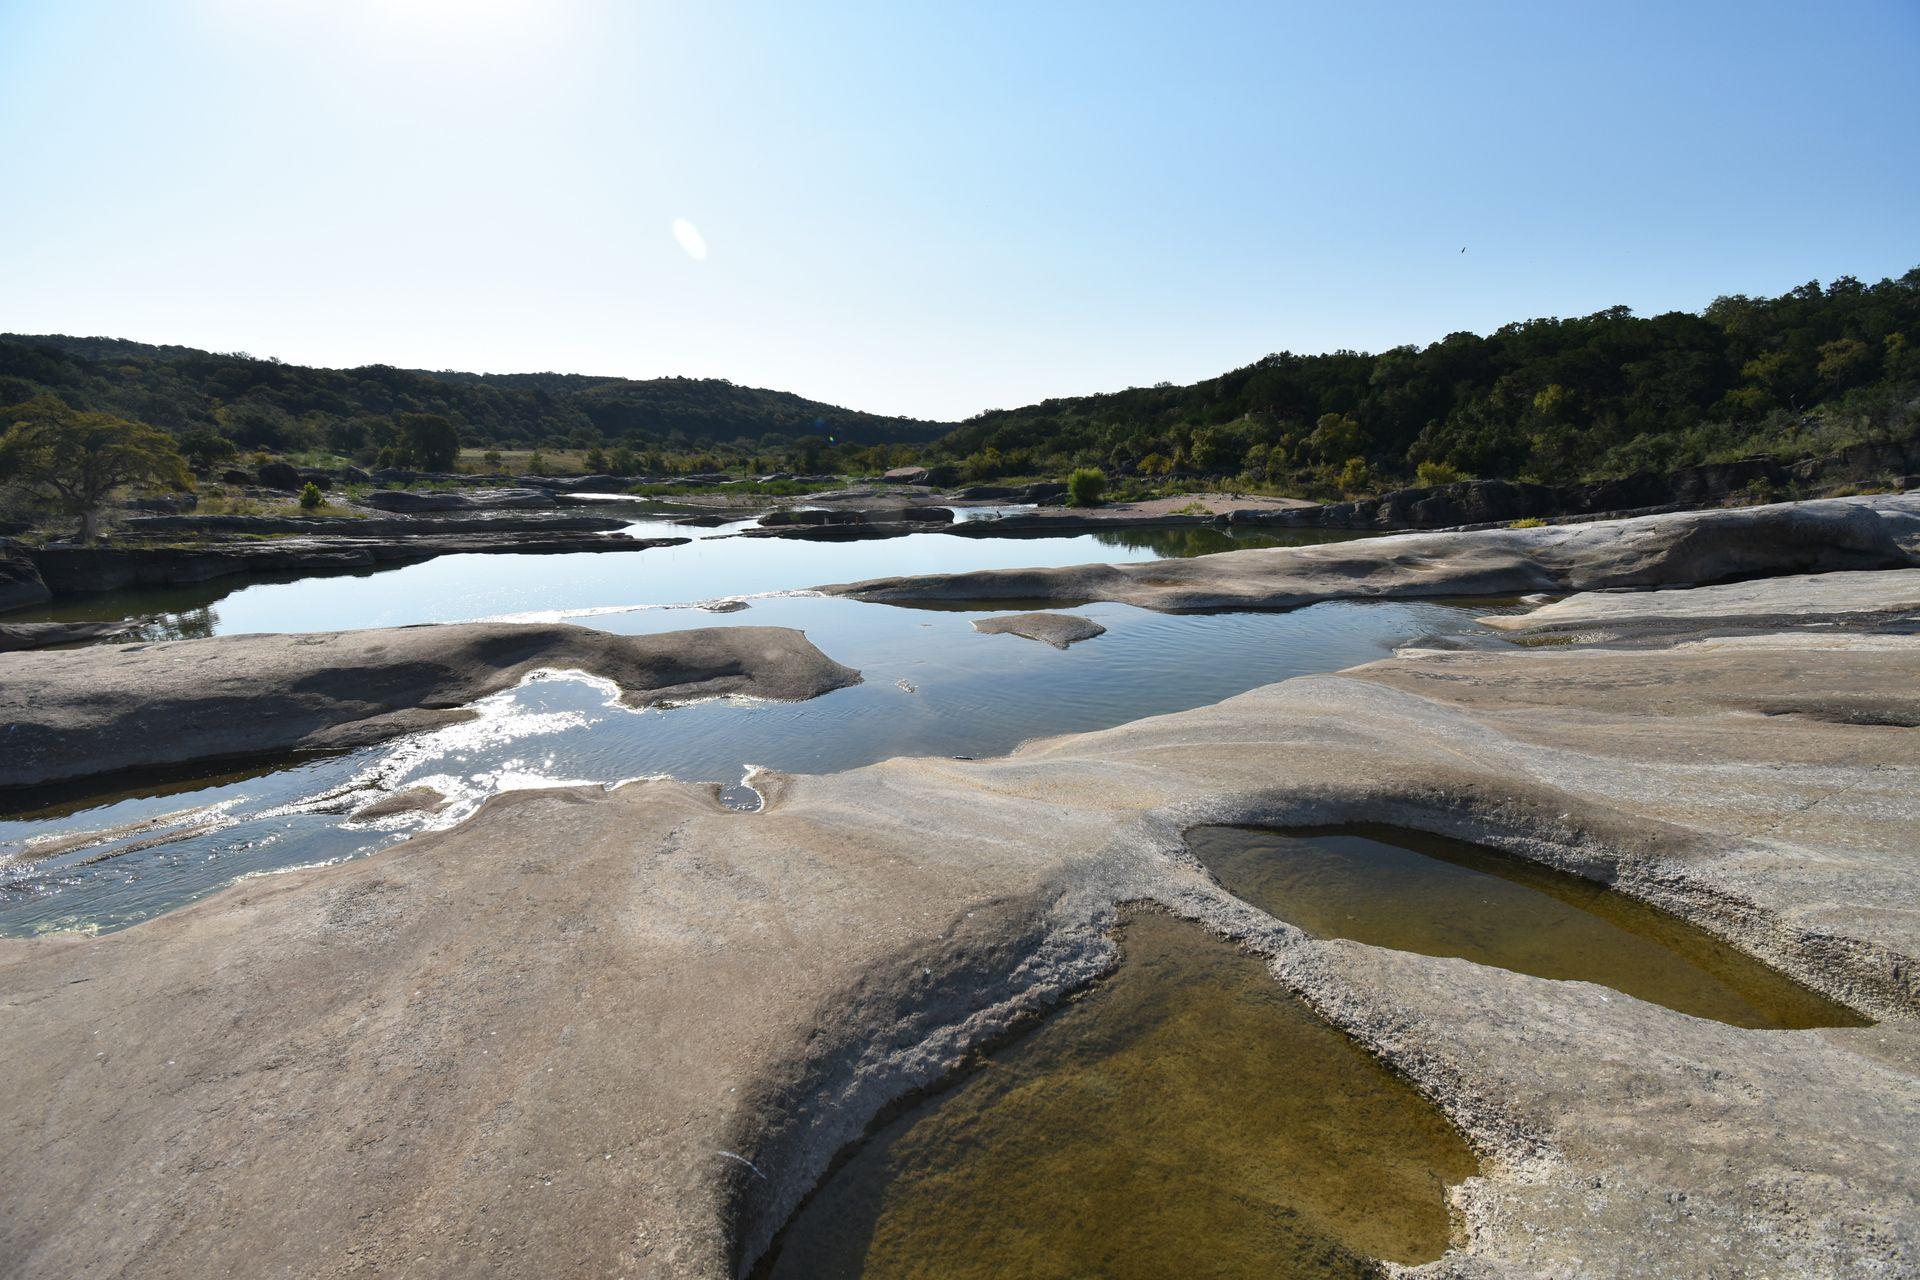 An area of limestone rocks with pools of water at Pedernales Falls State Park.